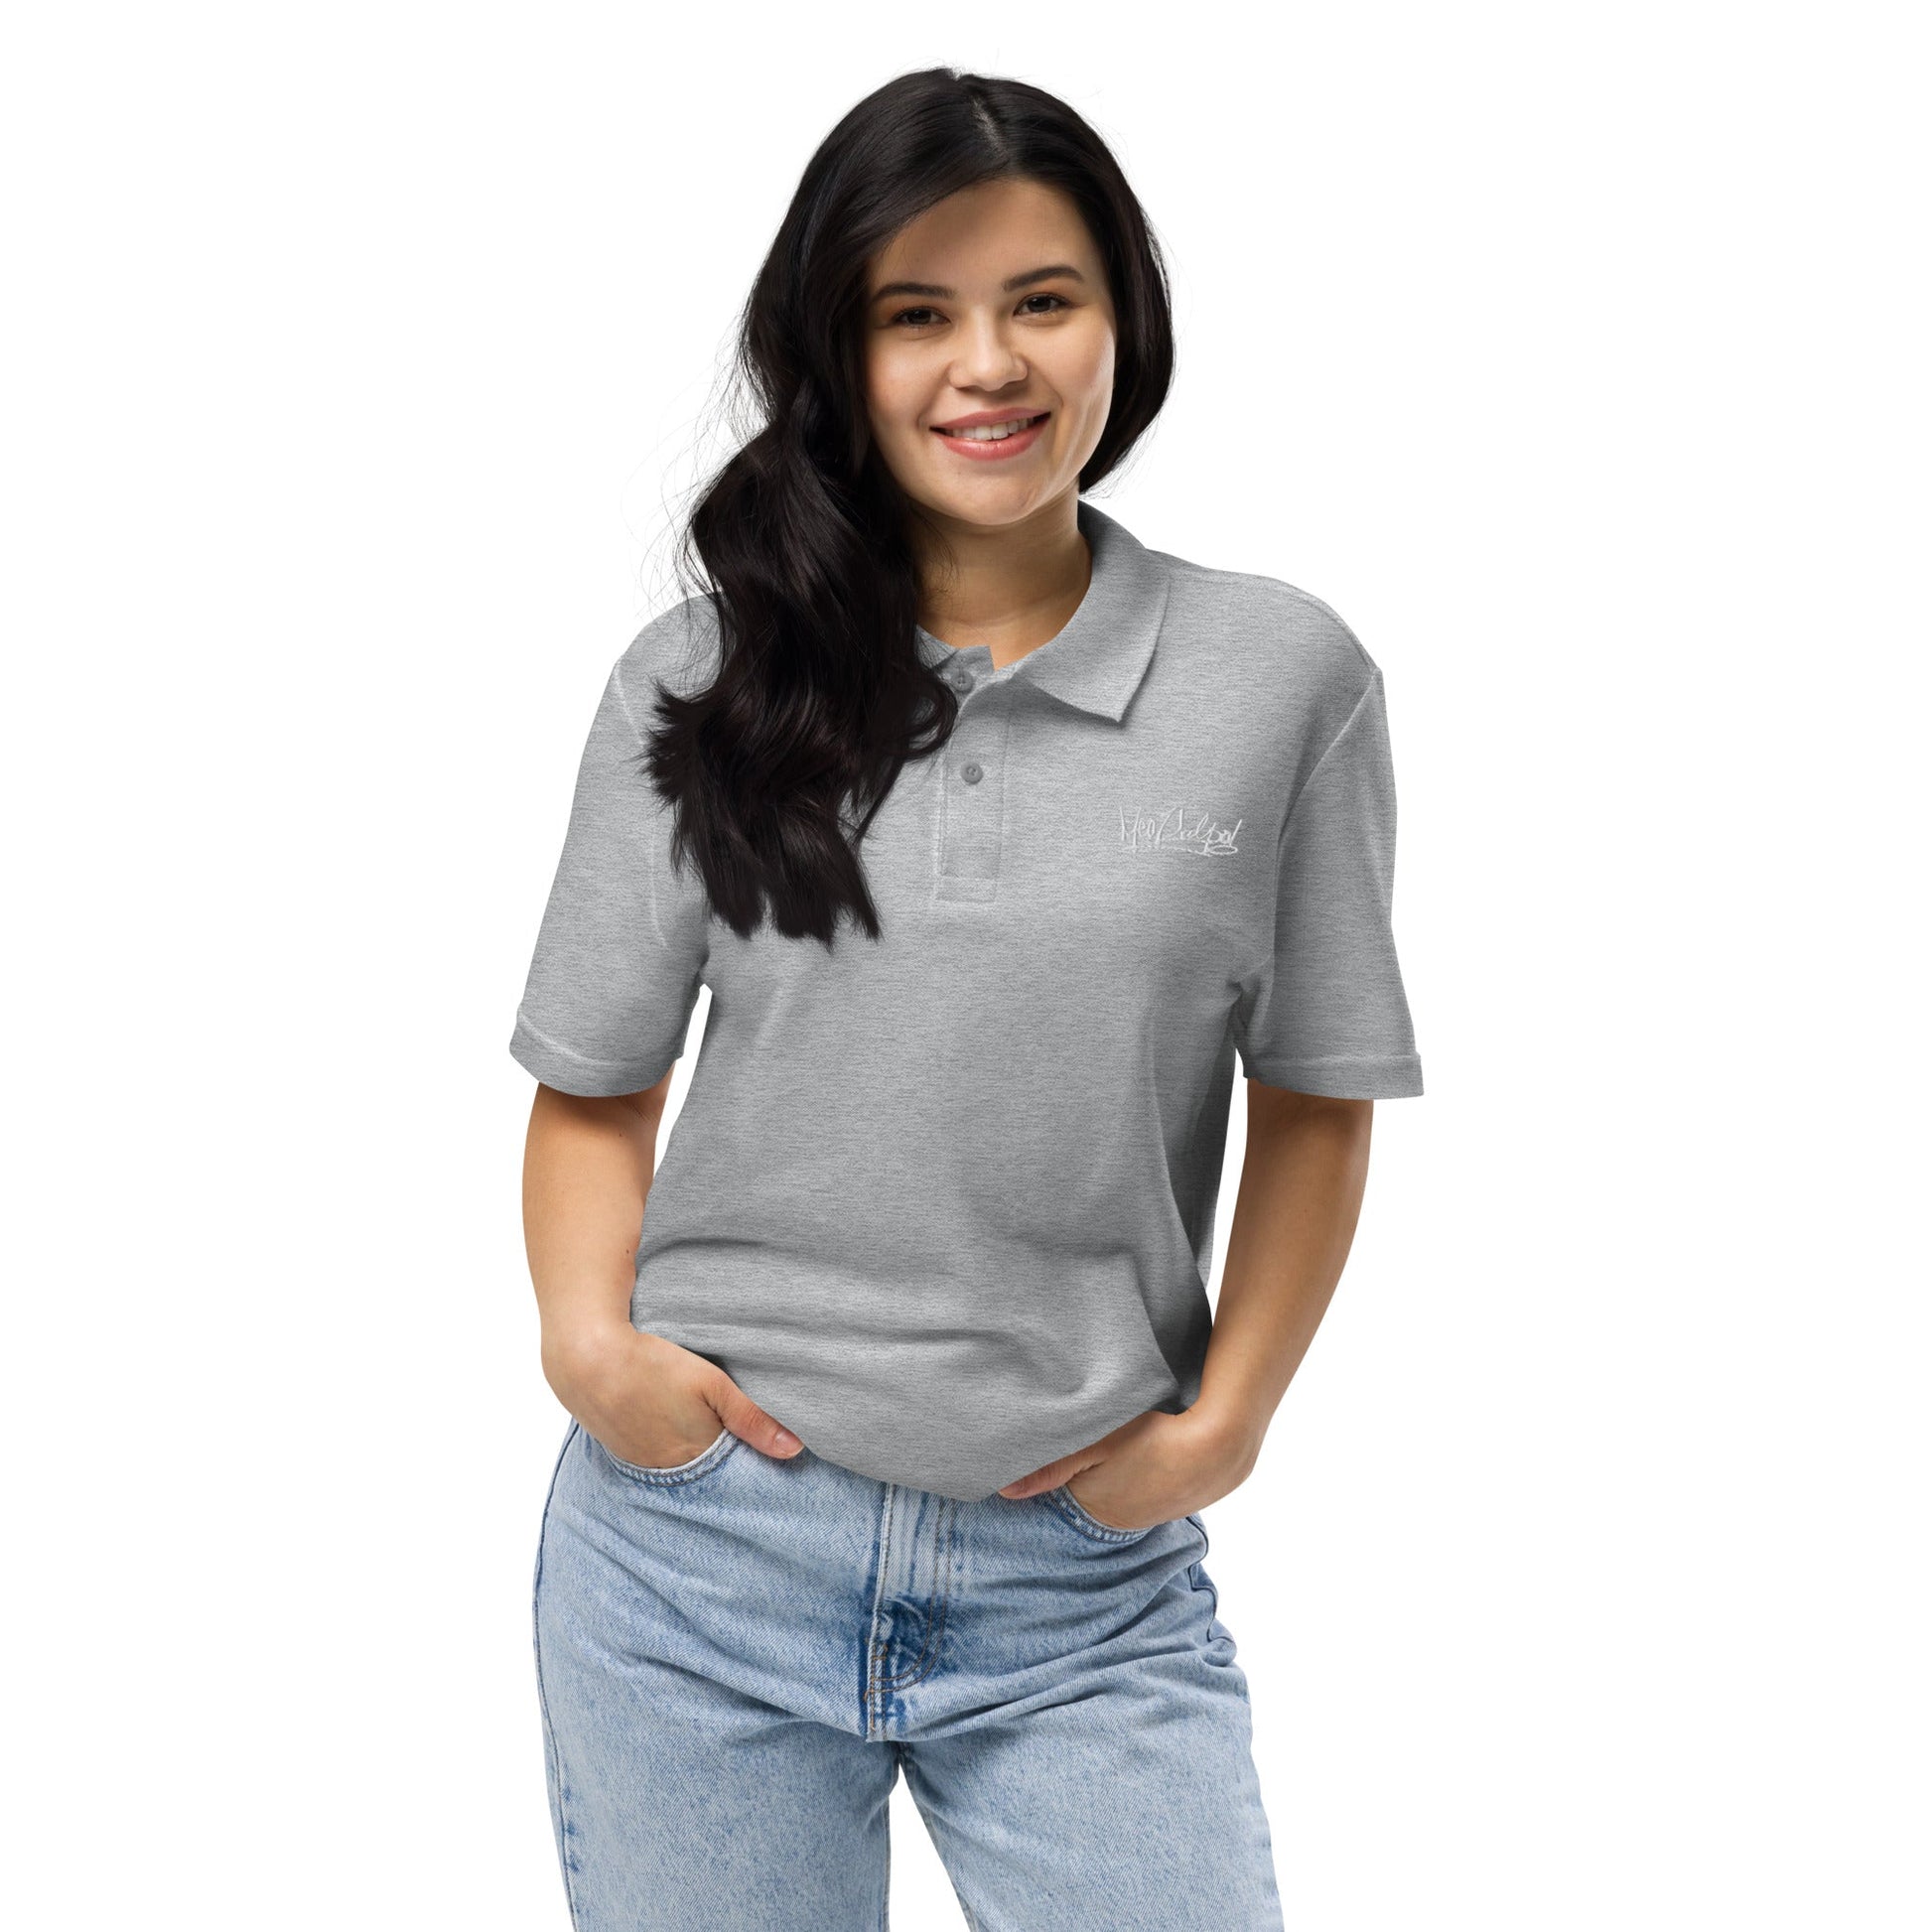 Happy girl wearing polo - Elevate your everyday look with the MeaKulpa Unisex Pique Polo Shirt in Grey. Crafted from premium ring-spun cotton, this shirt offers both comfort and durability. Its semi-fitted silhouette and side-seamed construction ensure a flattering fit, while the dyed-to-match buttons add a polished finish. Whether you're running errands or grabbing coffee with friends, this versatile grey polo is a wardrobe essential.